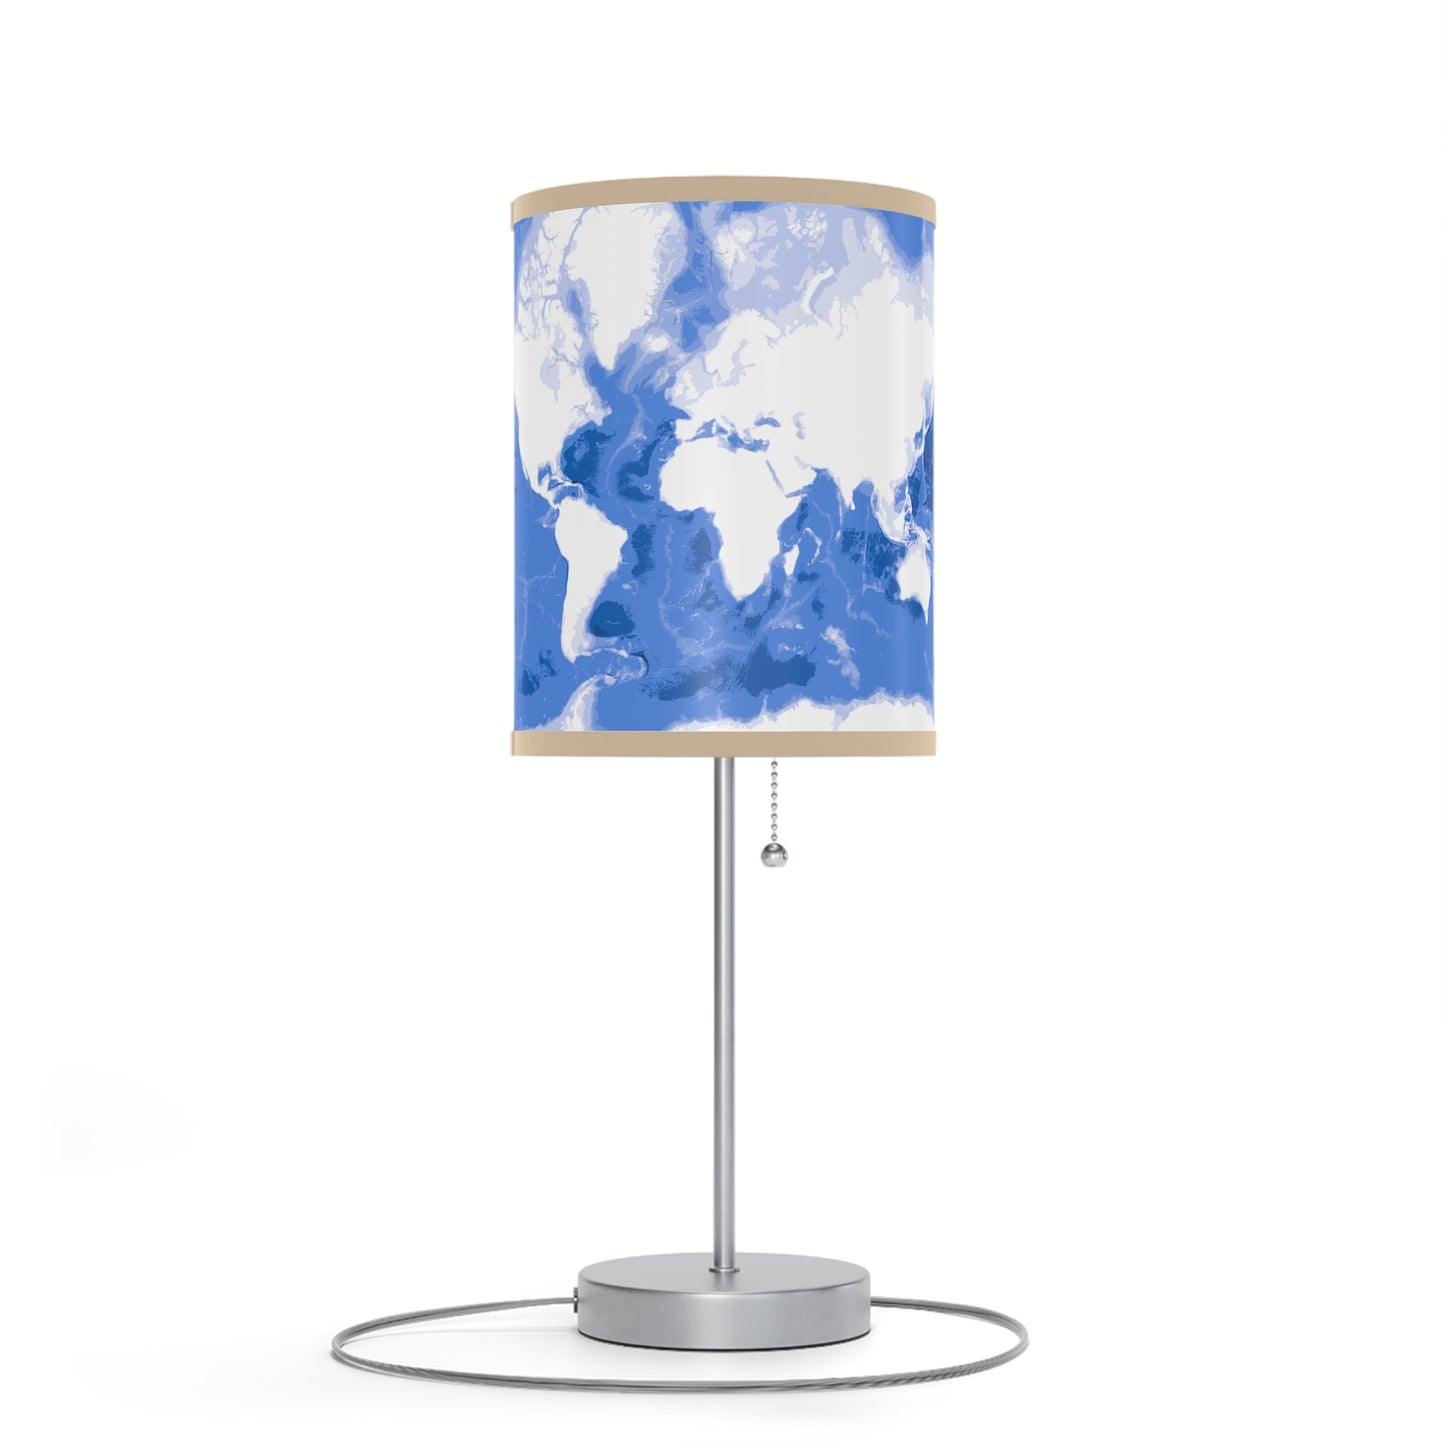 World map Lamp on a Stand, US|CA plug